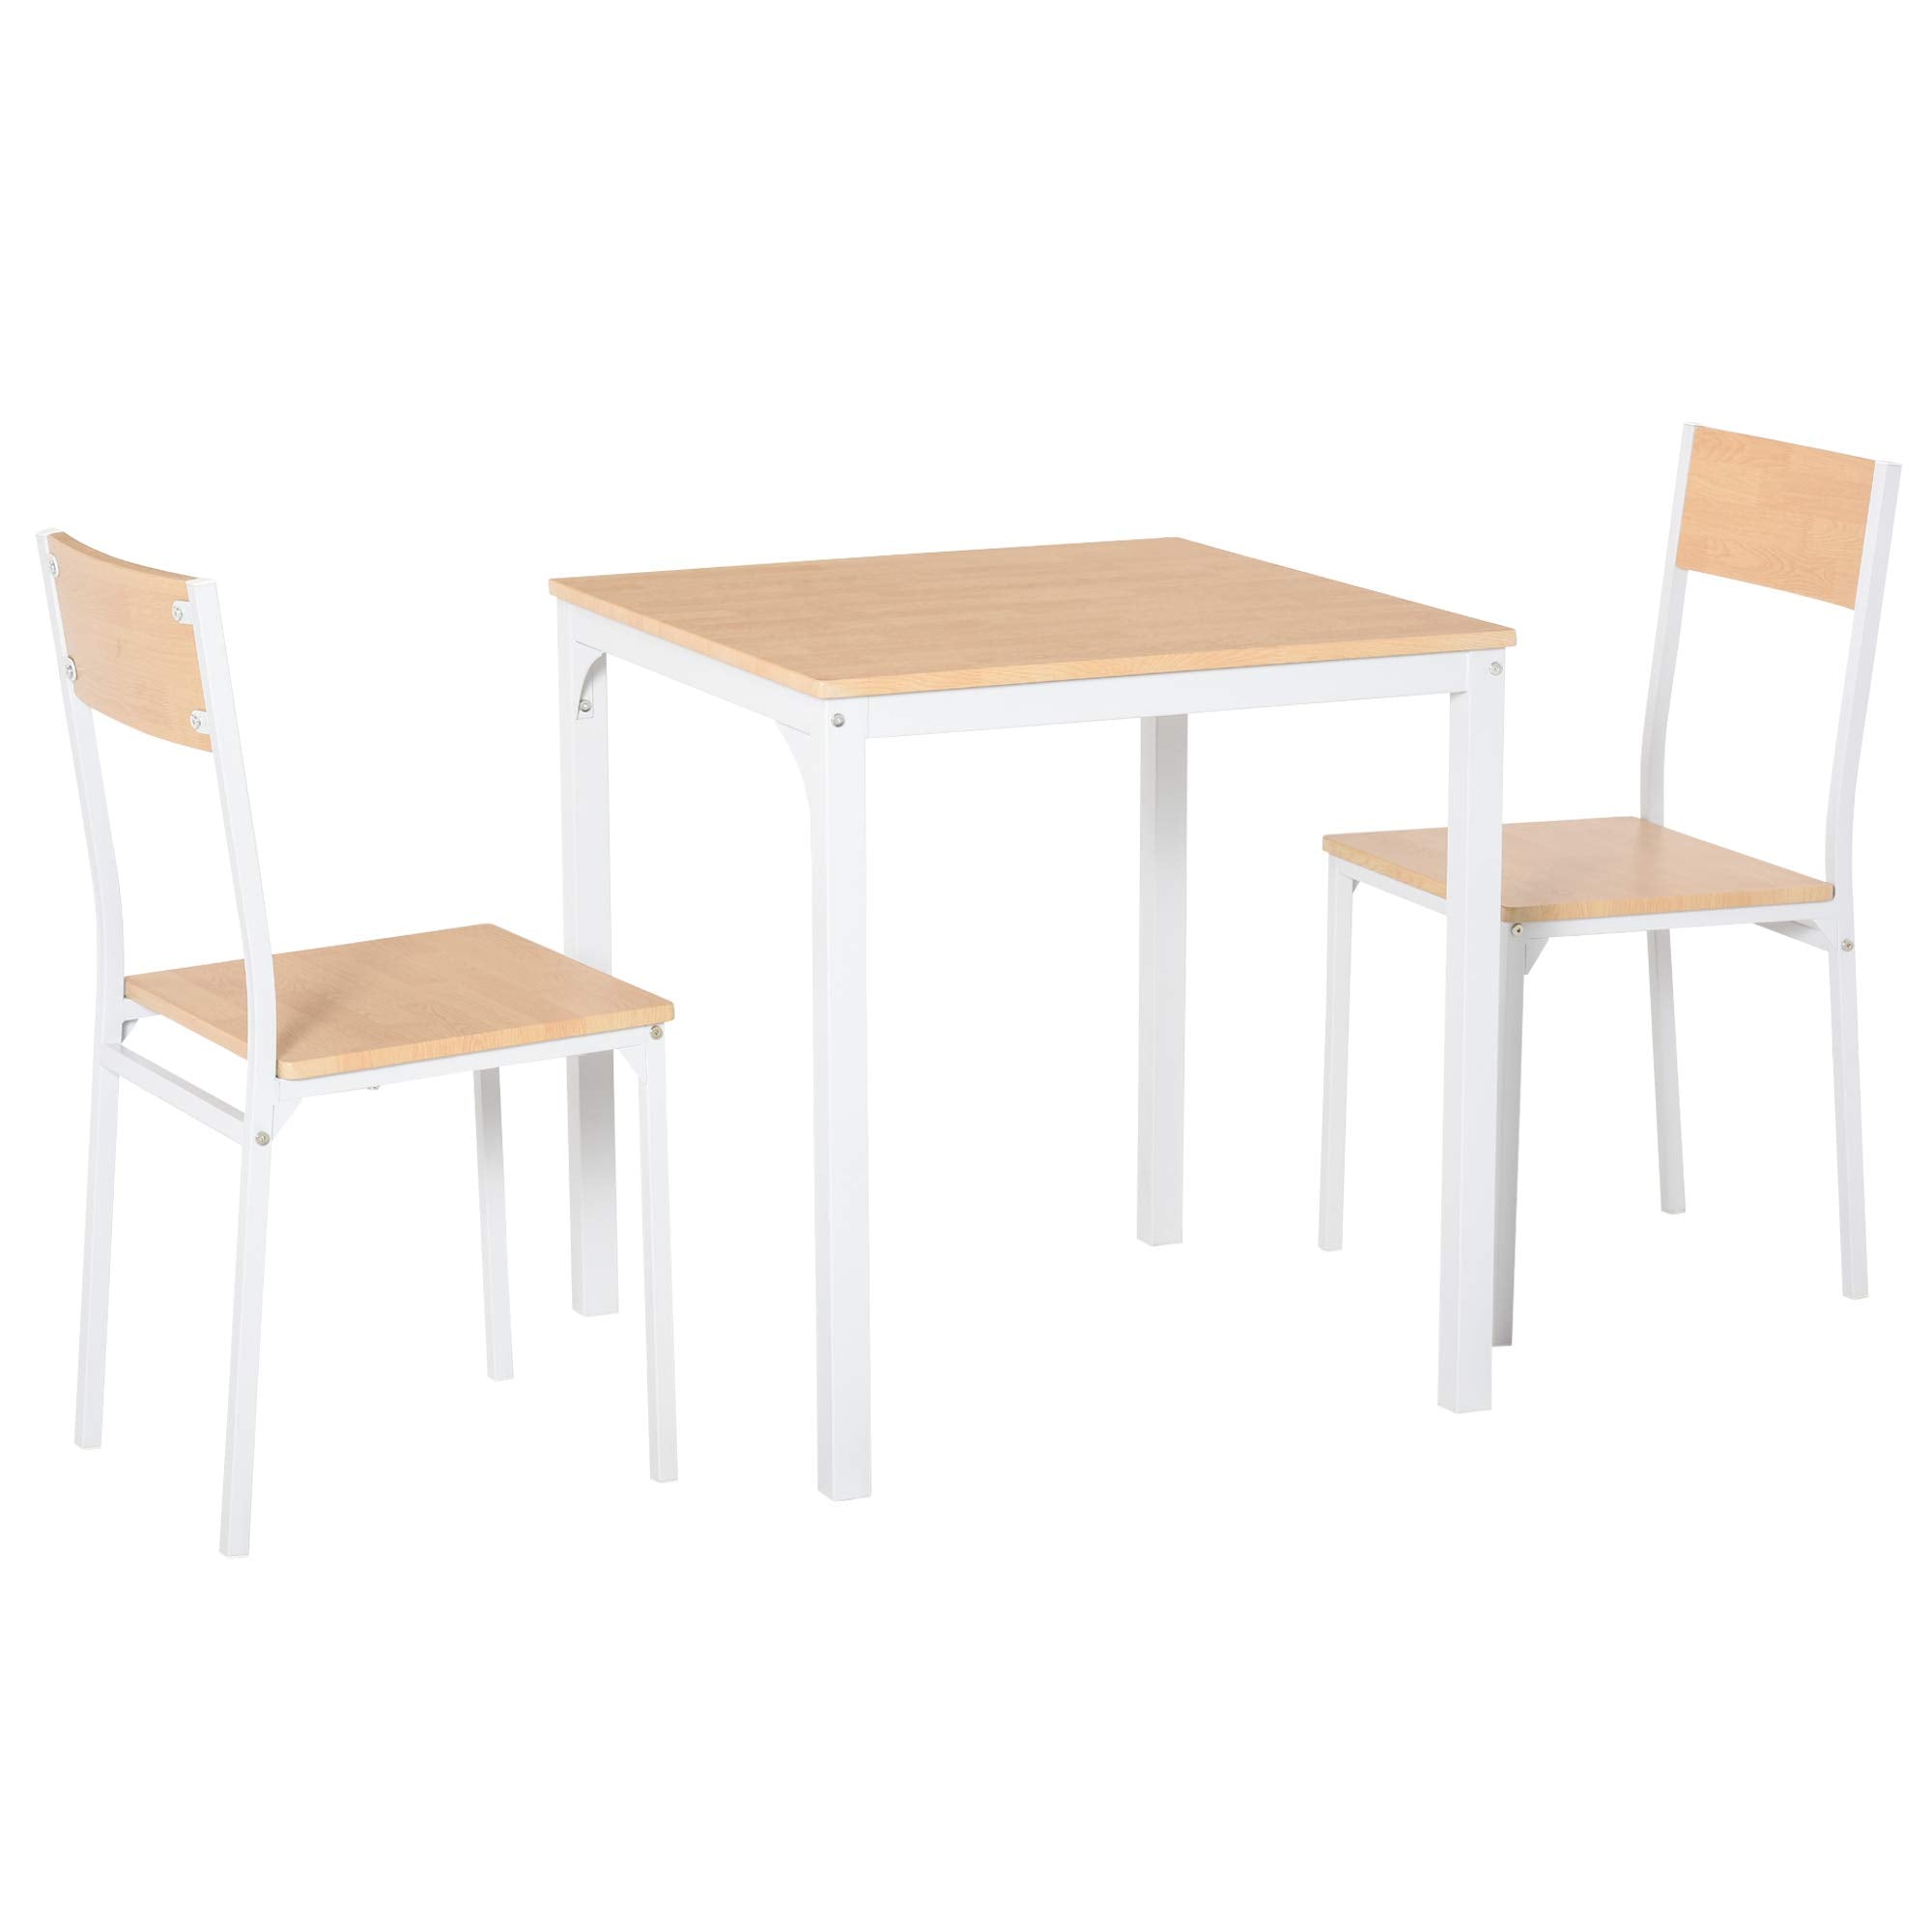 HOMCOM 3-Piece Wooden Square Dining Table Set with 1 Table and 2 Chairs and Sturdy Metal Frame for Small Space, White